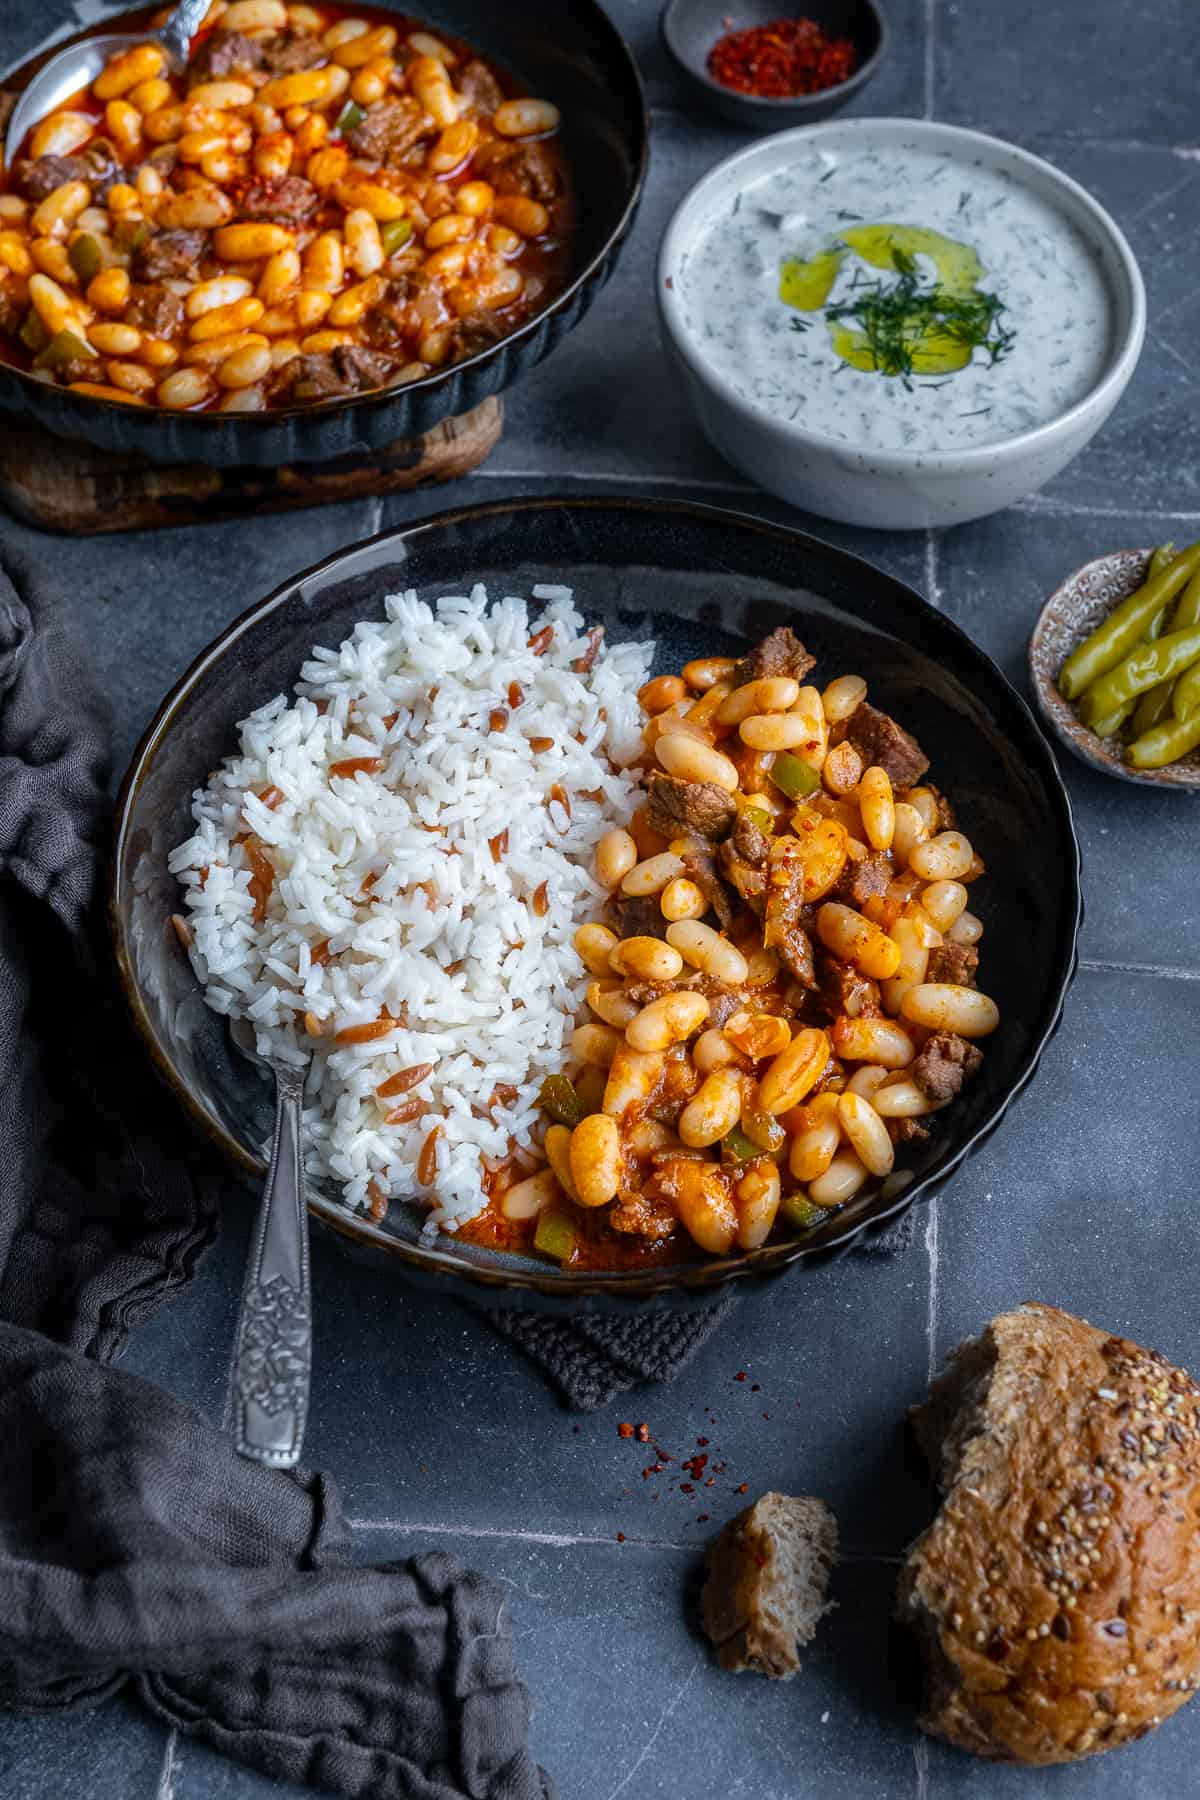 Turkish beans and rice pilav in the same bowl, cacik, pickles and another bowl of bean stew accompany.